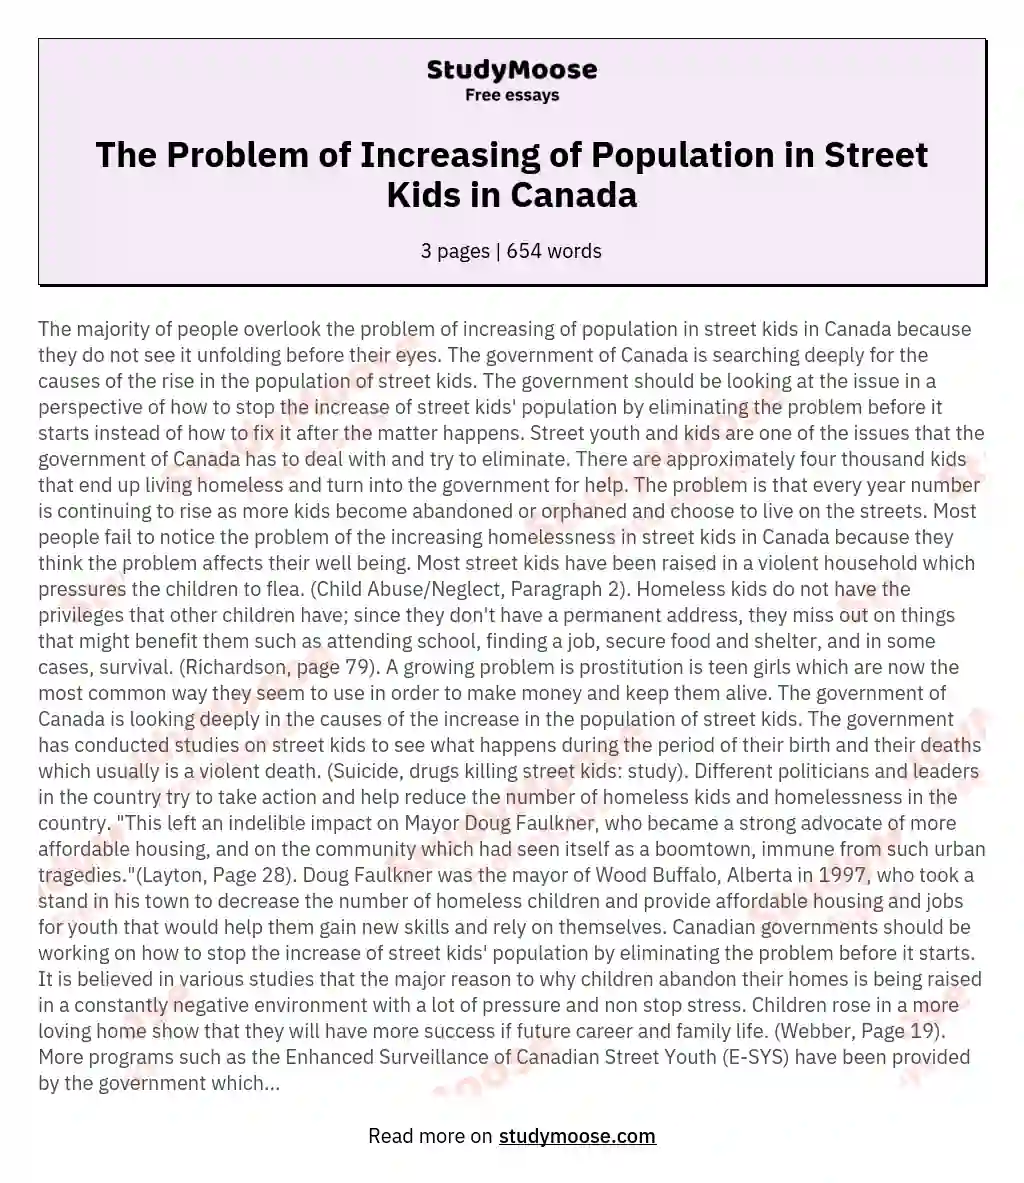 The Problem of Increasing of Population in Street Kids in Canada essay